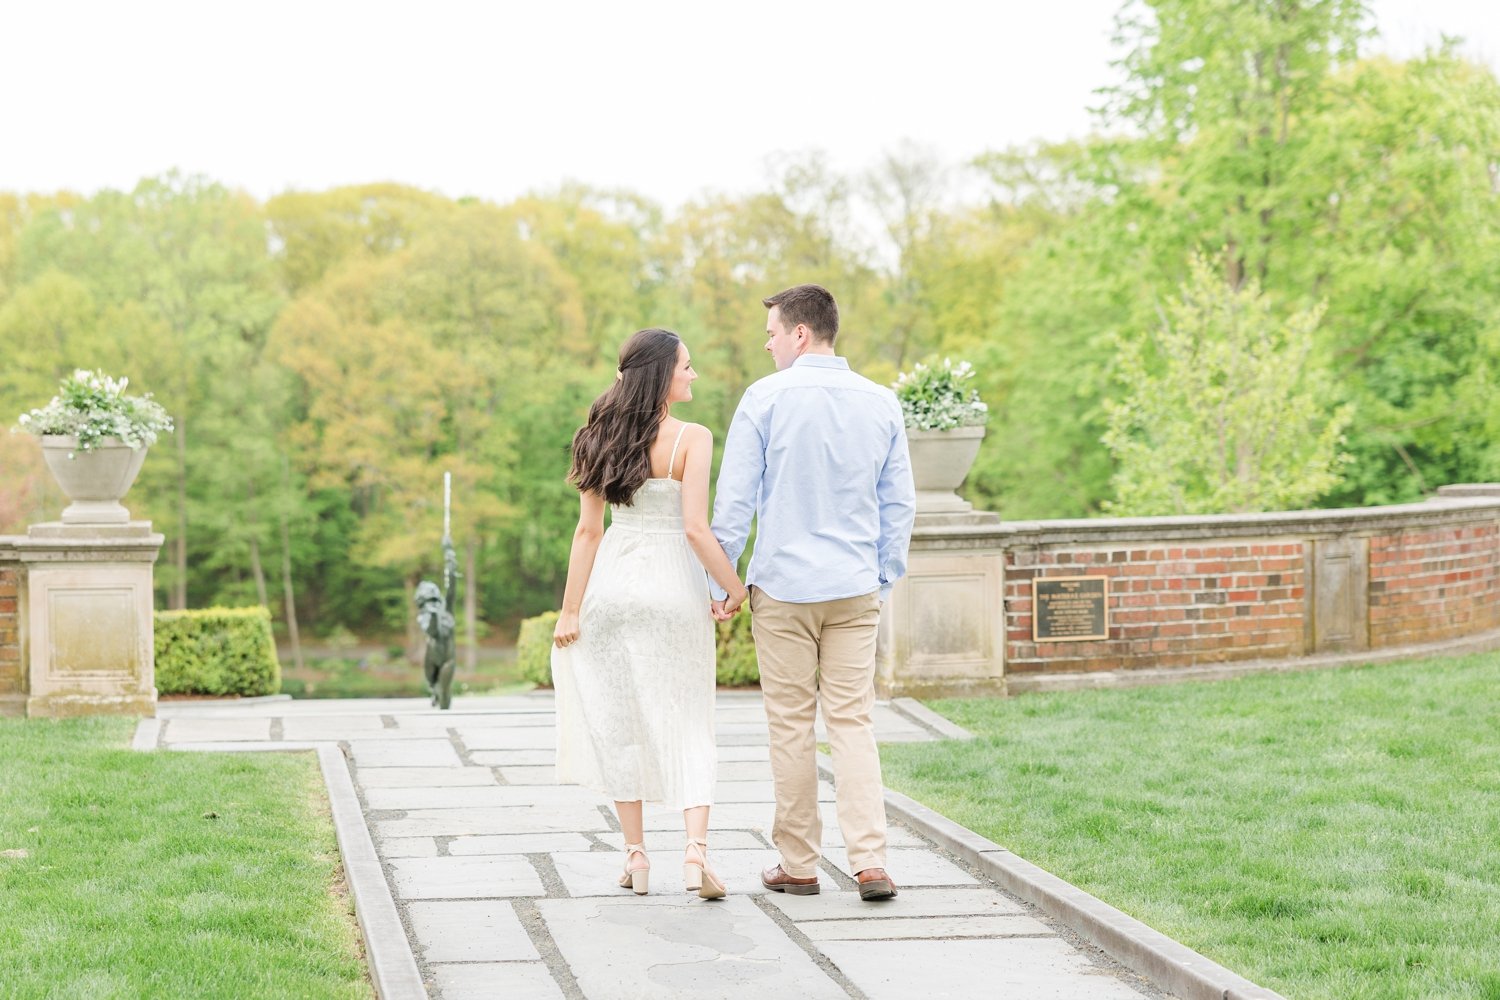 spring-engagement-session-waveny-park-new-canaan-connecticut-wedding-photographer-shaina-lee-photography